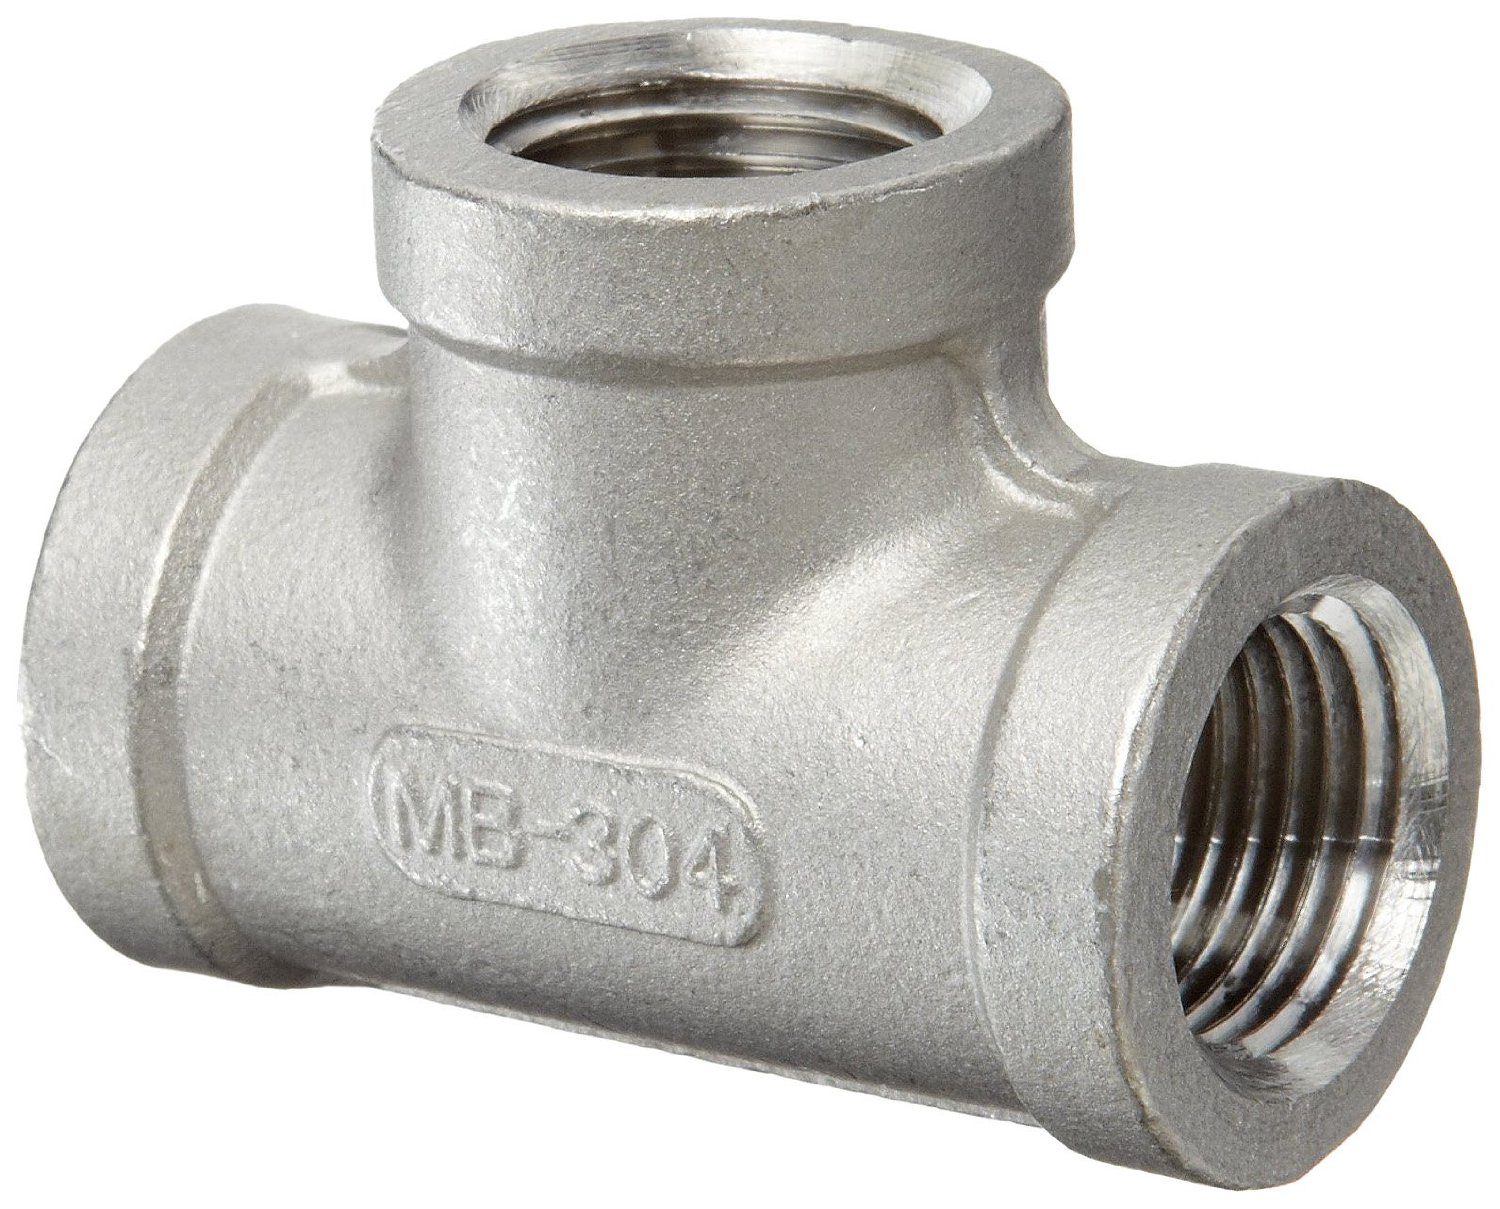 ASME B16.9 Buttweld Pipe Fitting Manufacturer